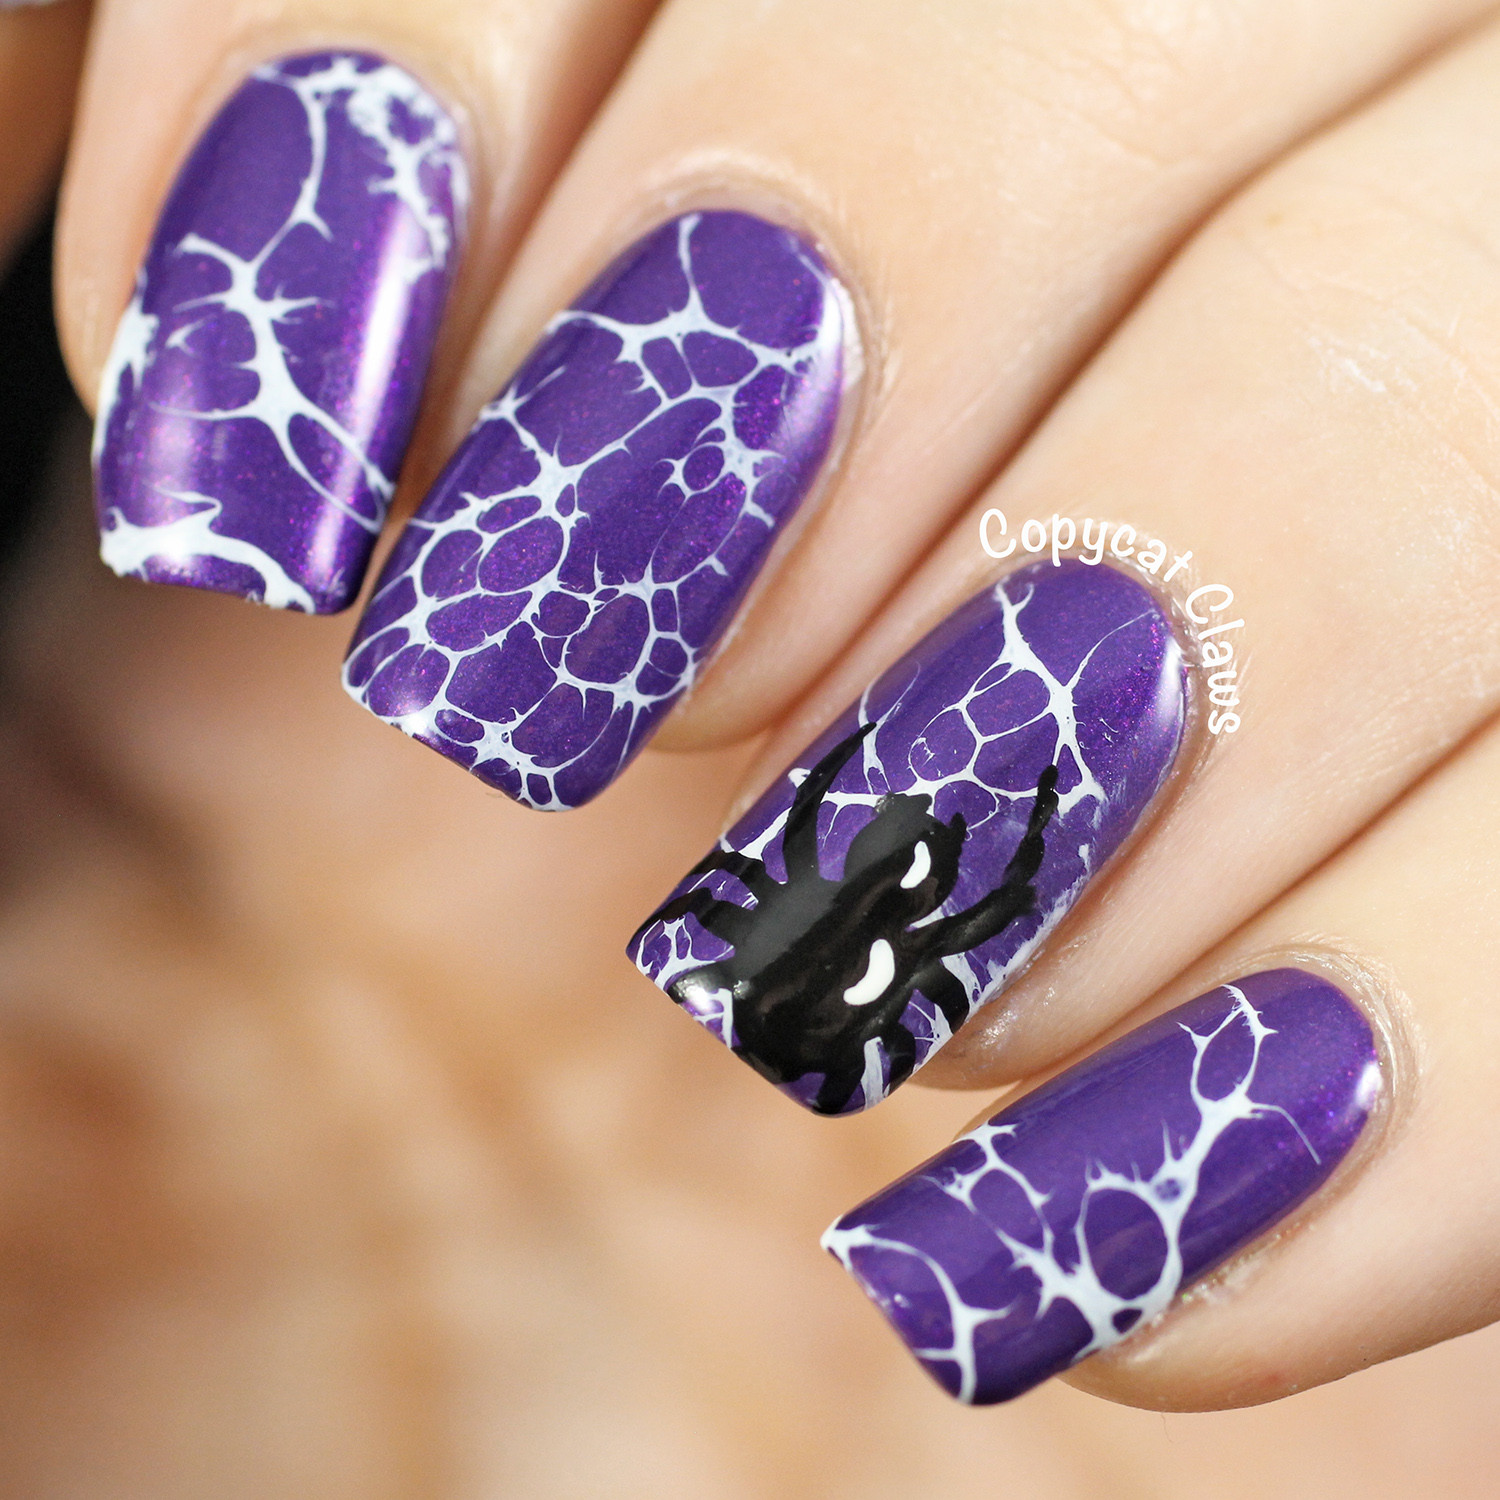 Spider Web Nail Art
 Copycat Claws Spider Waterspotted Nails